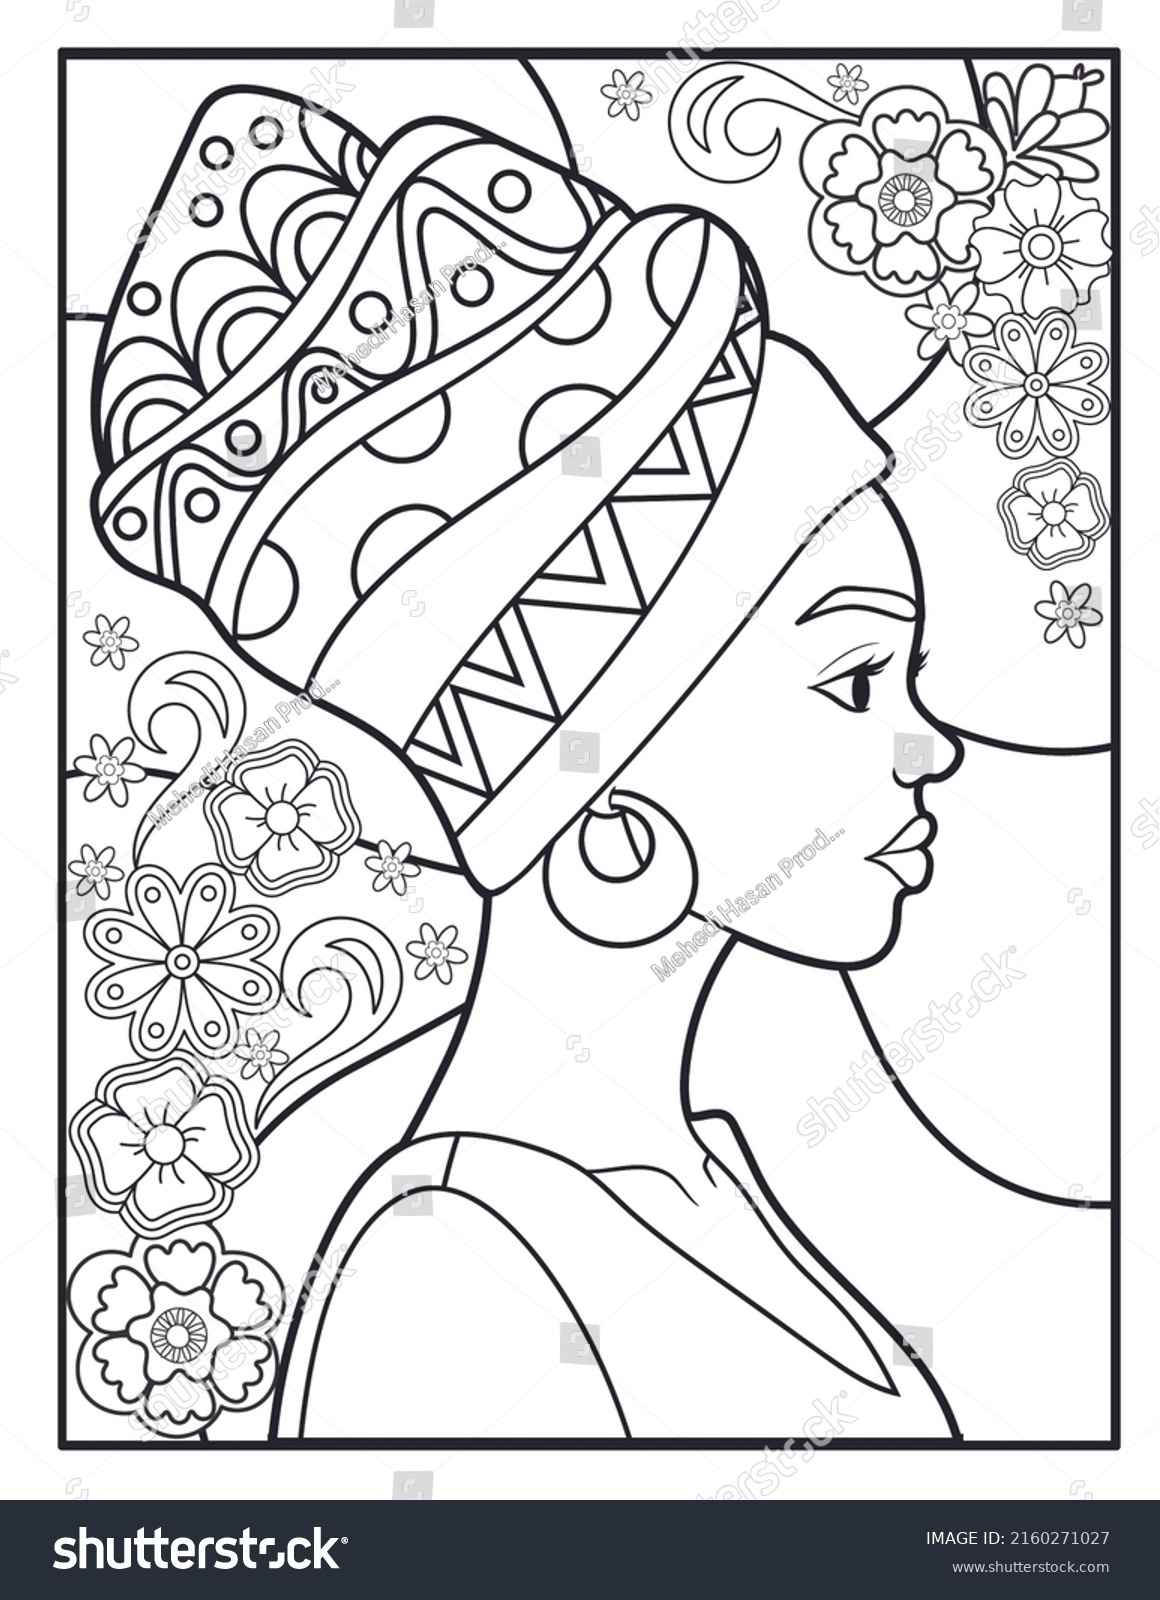 African American Black Girl Woman Coloring Stock Illustration ...